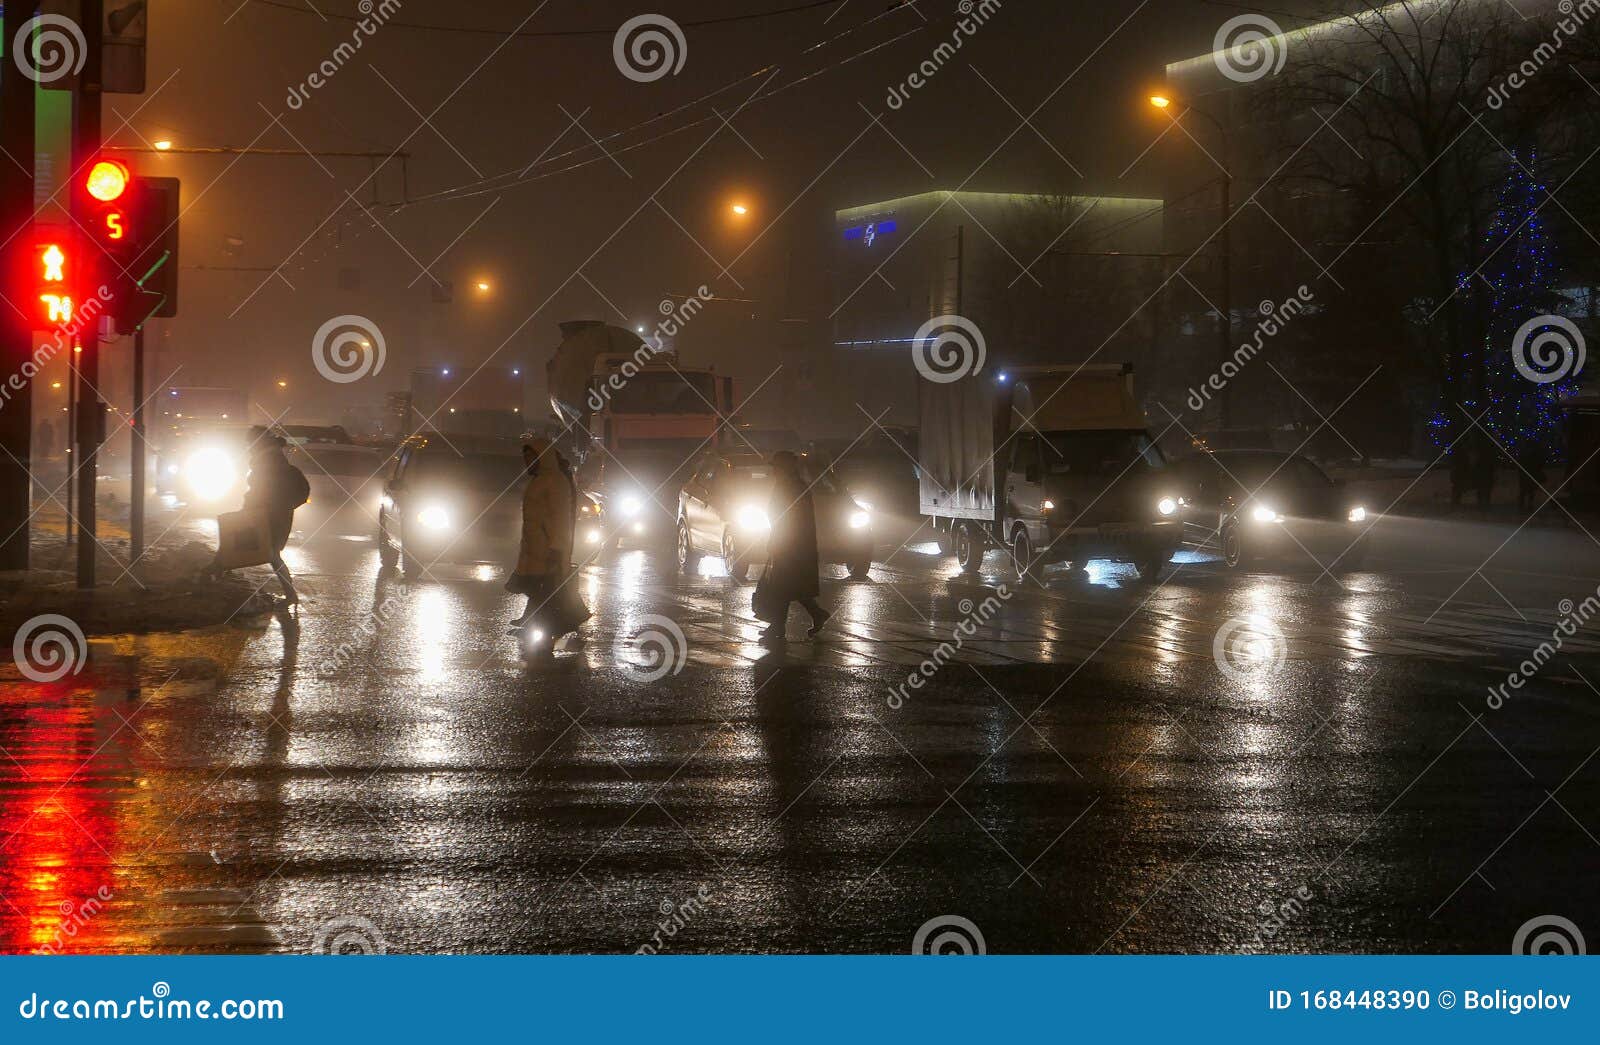 foggy night crossing with pedestrains, wet asphalt road, street and car lights